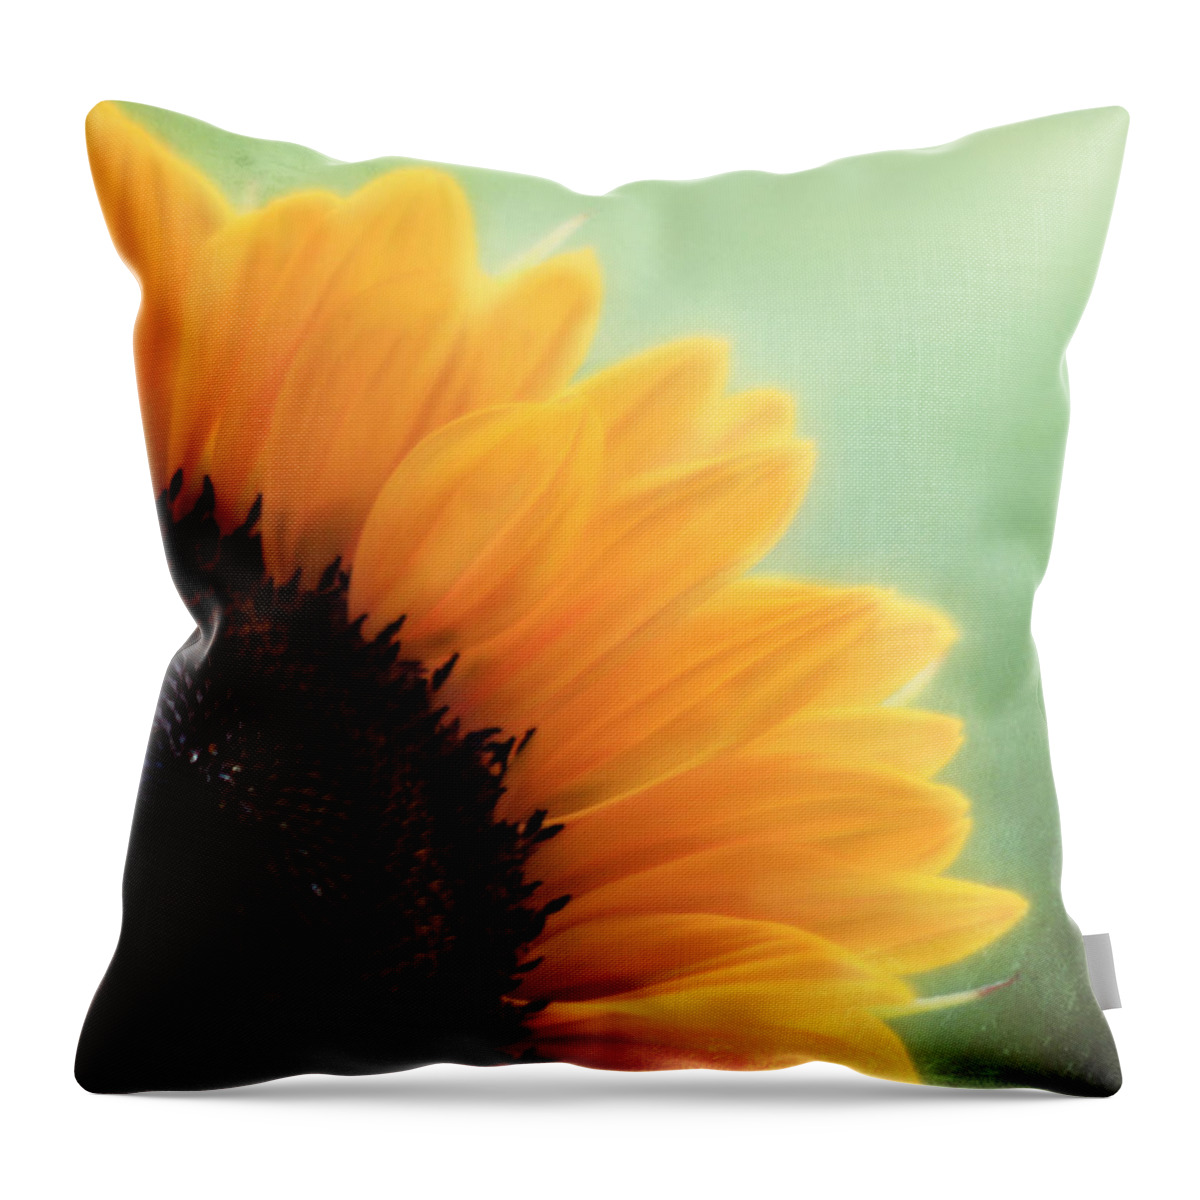 Sunflower Throw Pillow featuring the photograph Staring Into the Sun by Amy Tyler